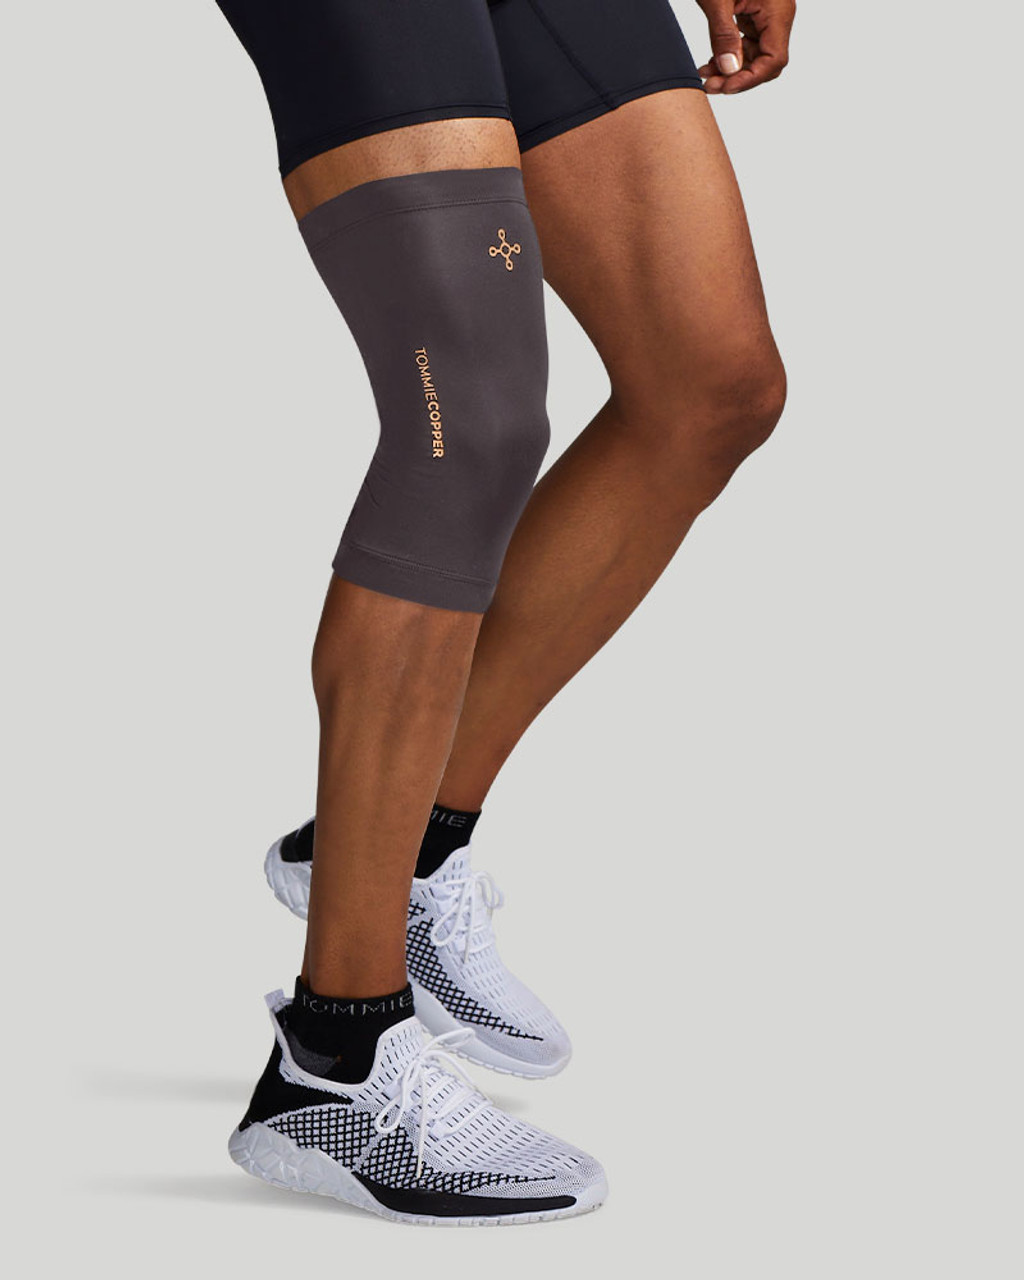 Tommie Copper Knee Sleeve, Slate Grey, Small (FREE & FAST SHIPPING!)